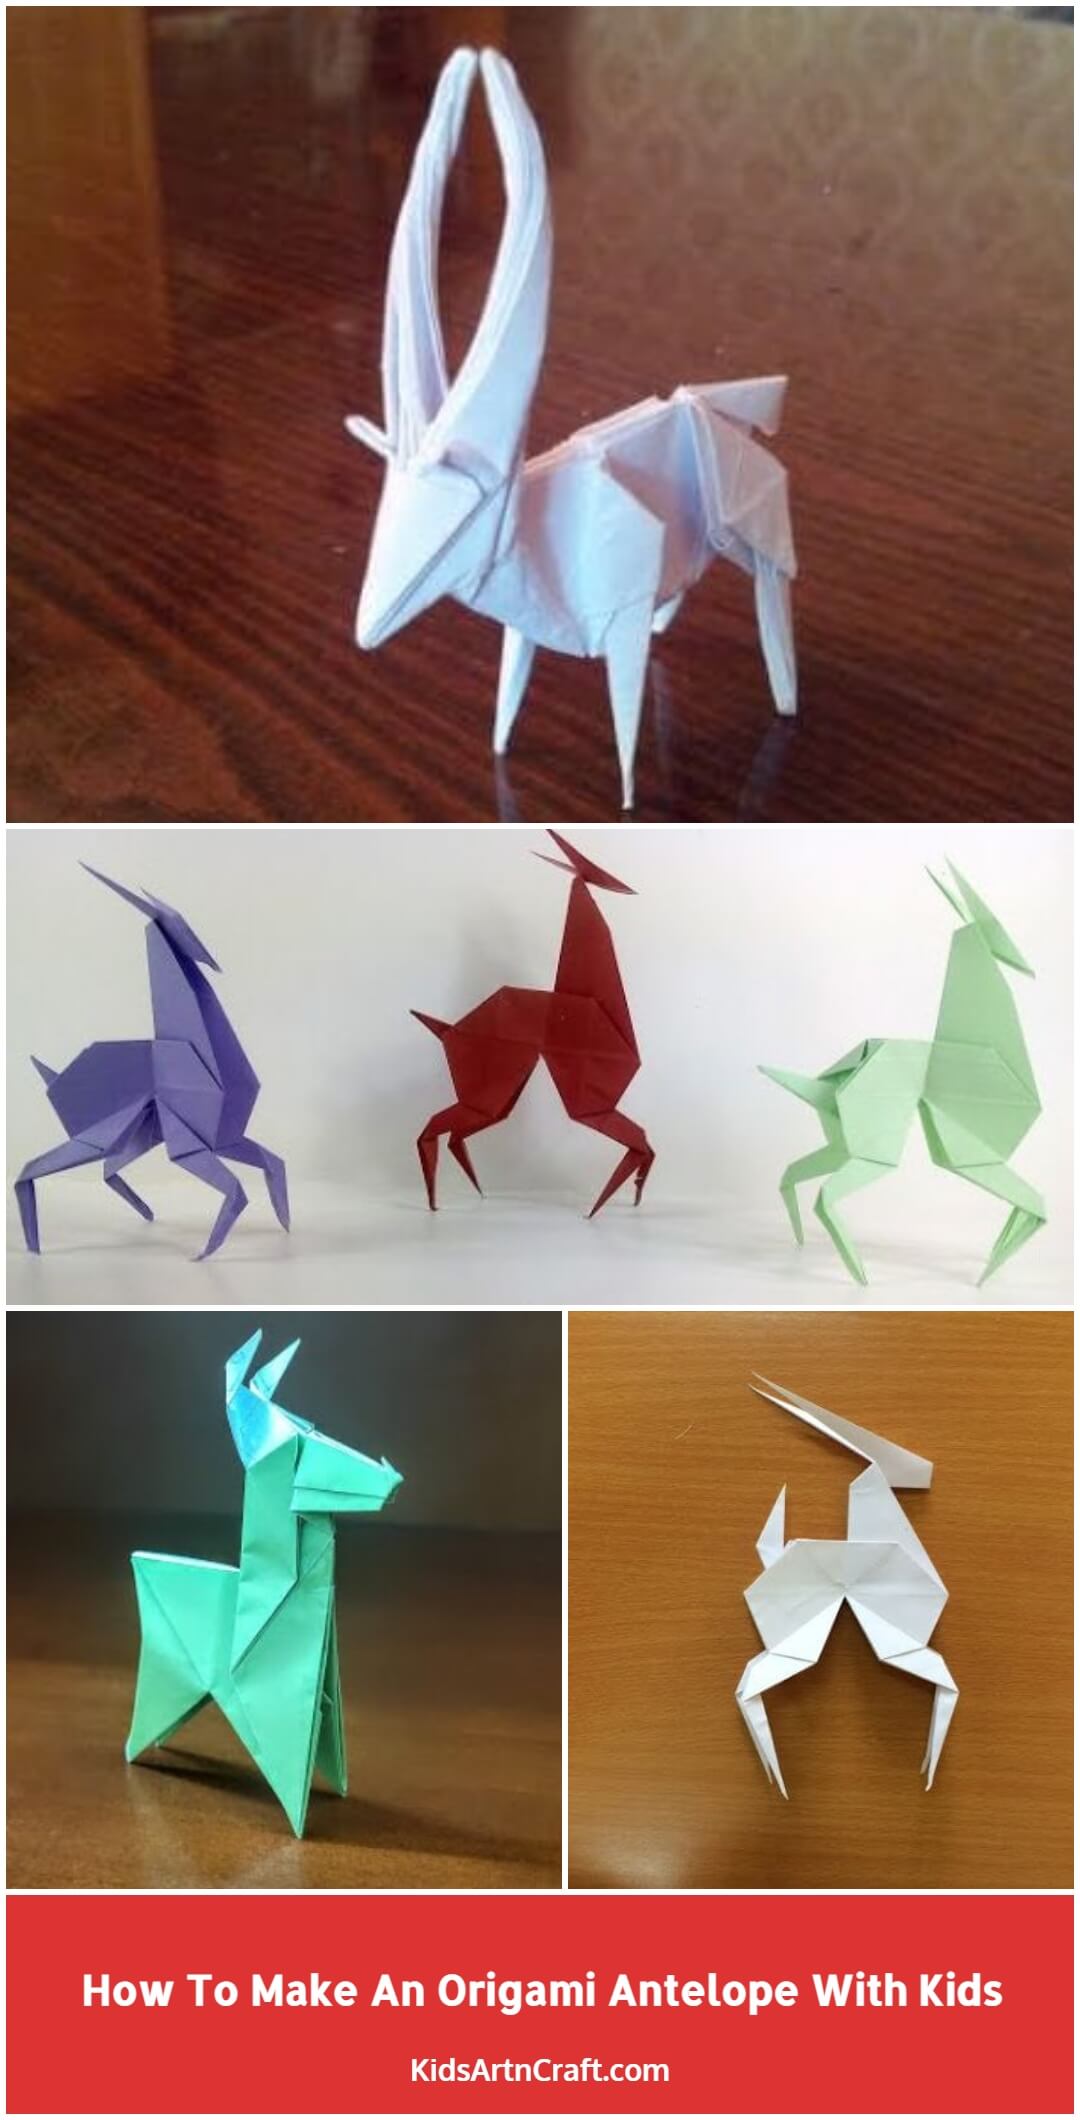 How To Make An Origami Antelope With Kids